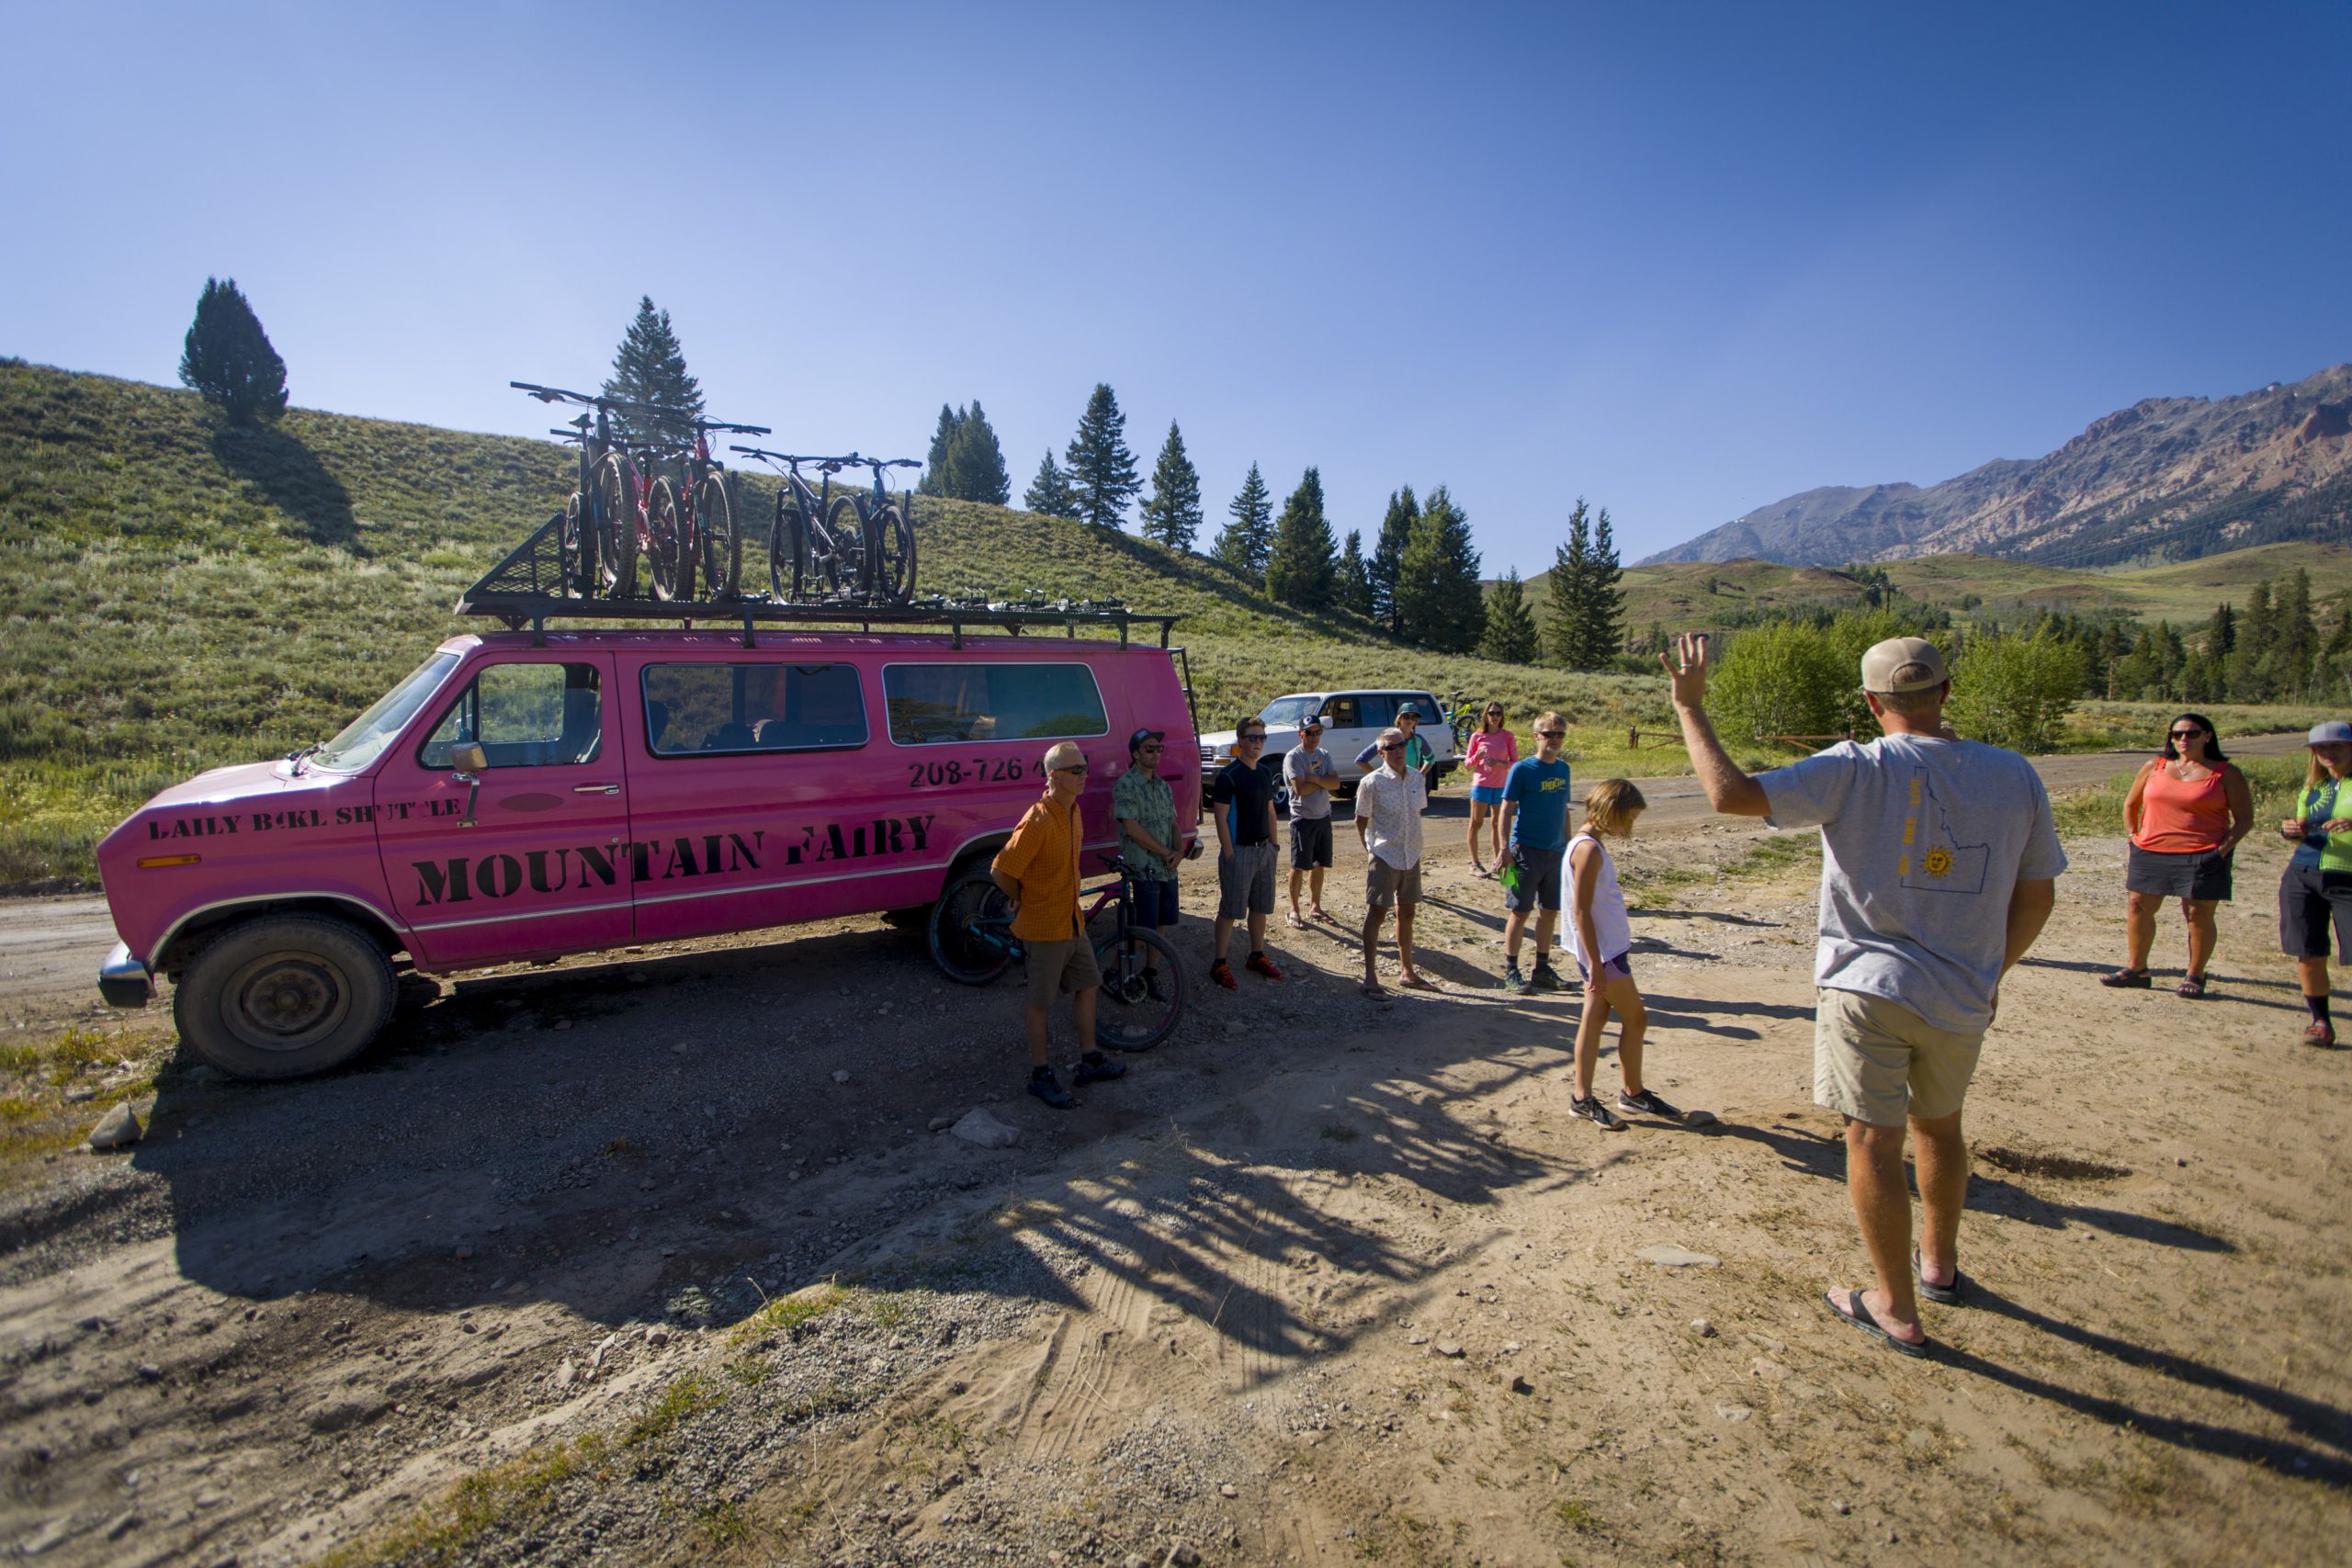 Several people gathered in front of a pink van with mountain bike rack on roof, listening to instructions from guide